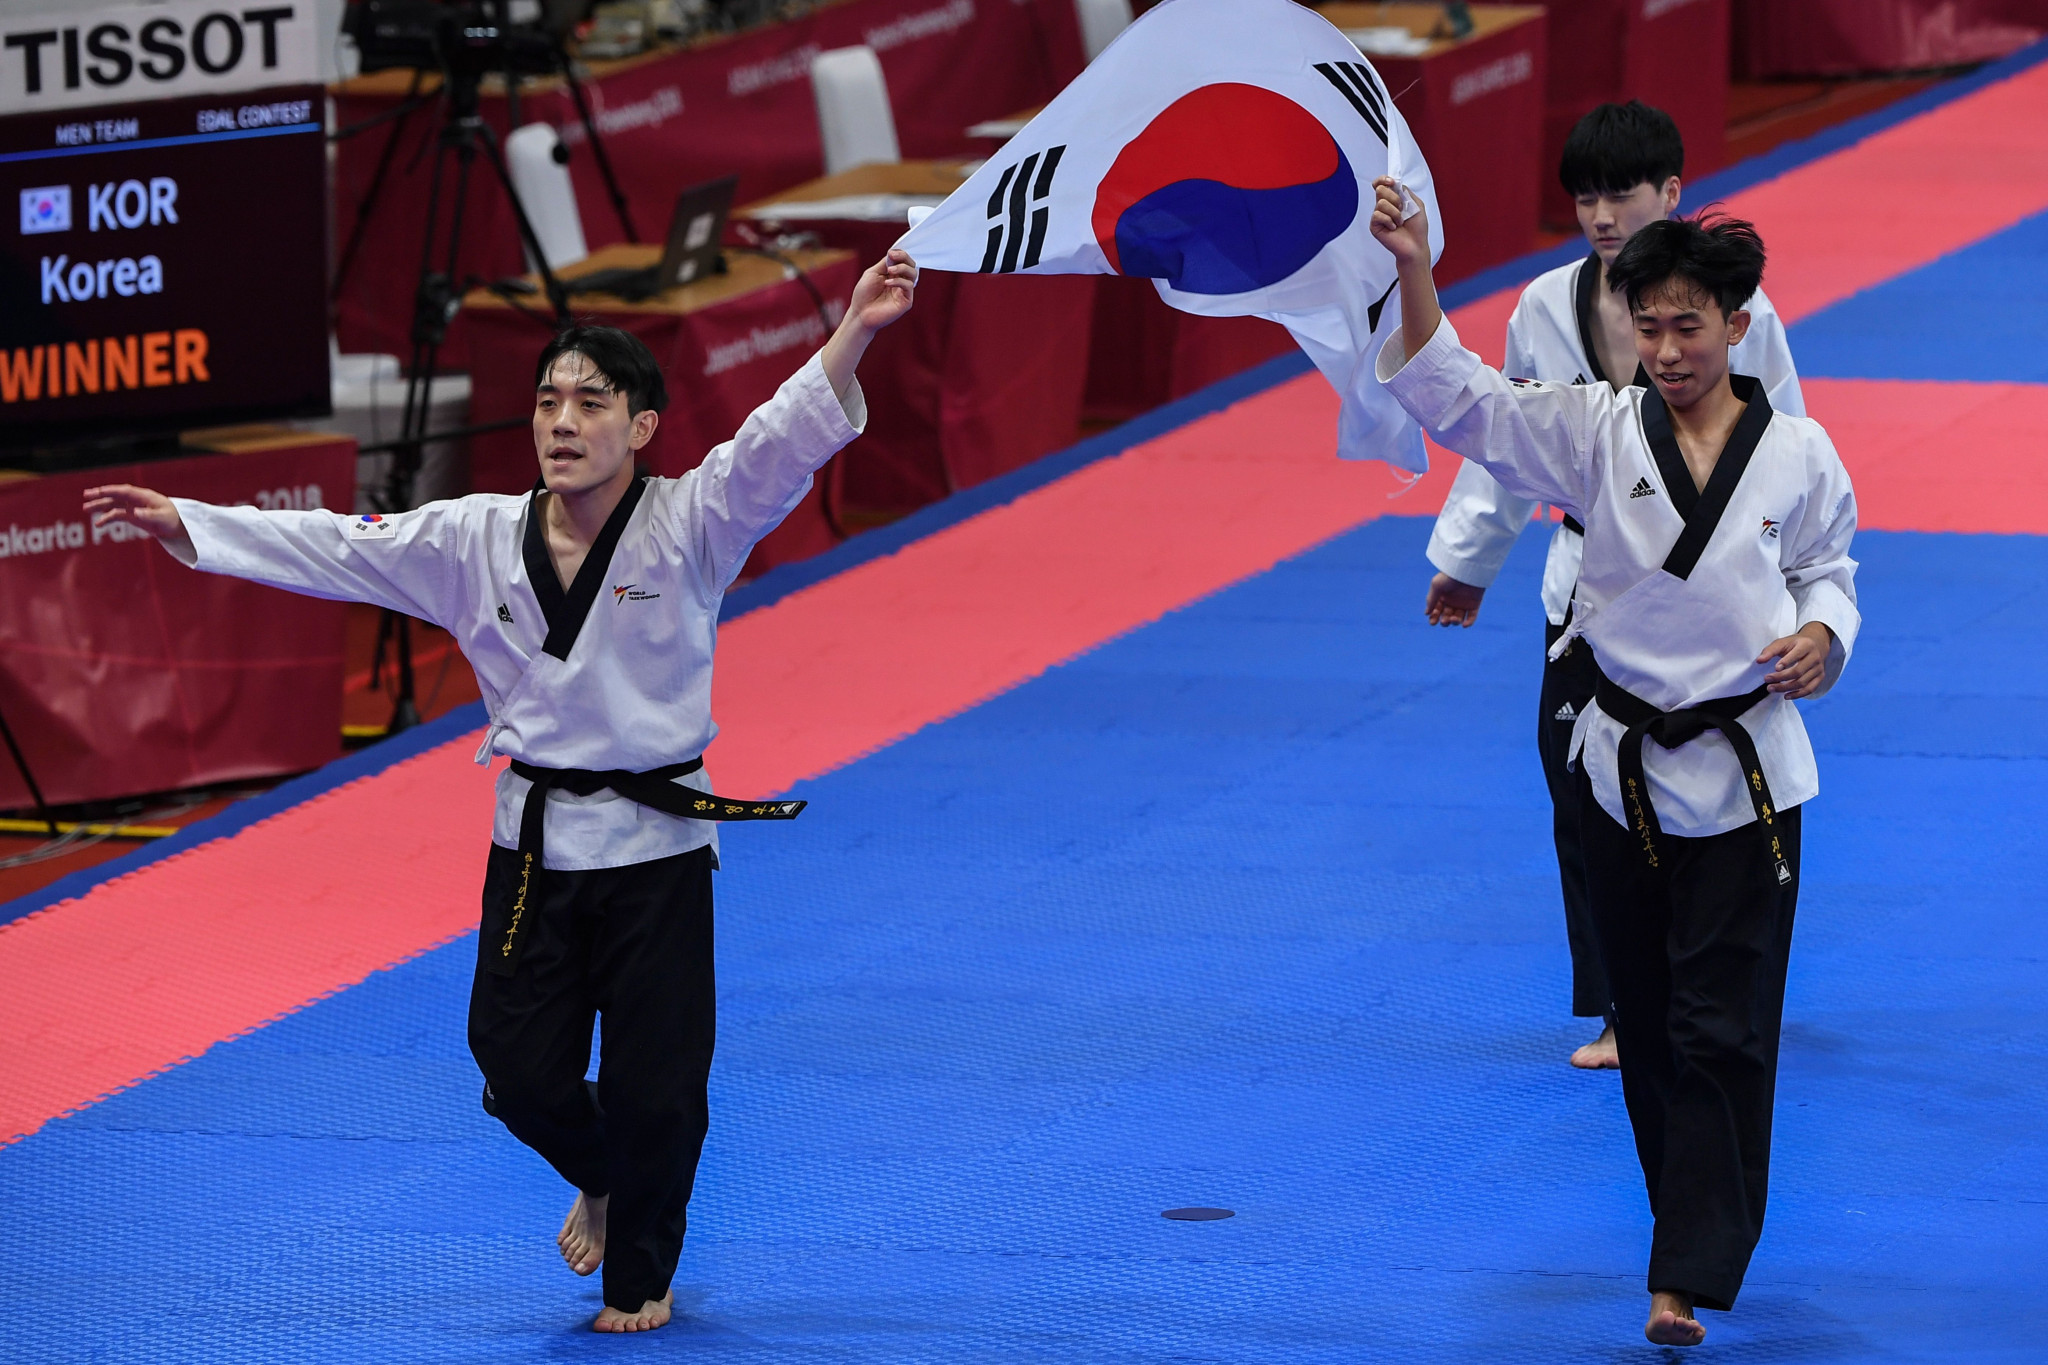 Taekwondo is an important part of Korean culture ©Getty Images